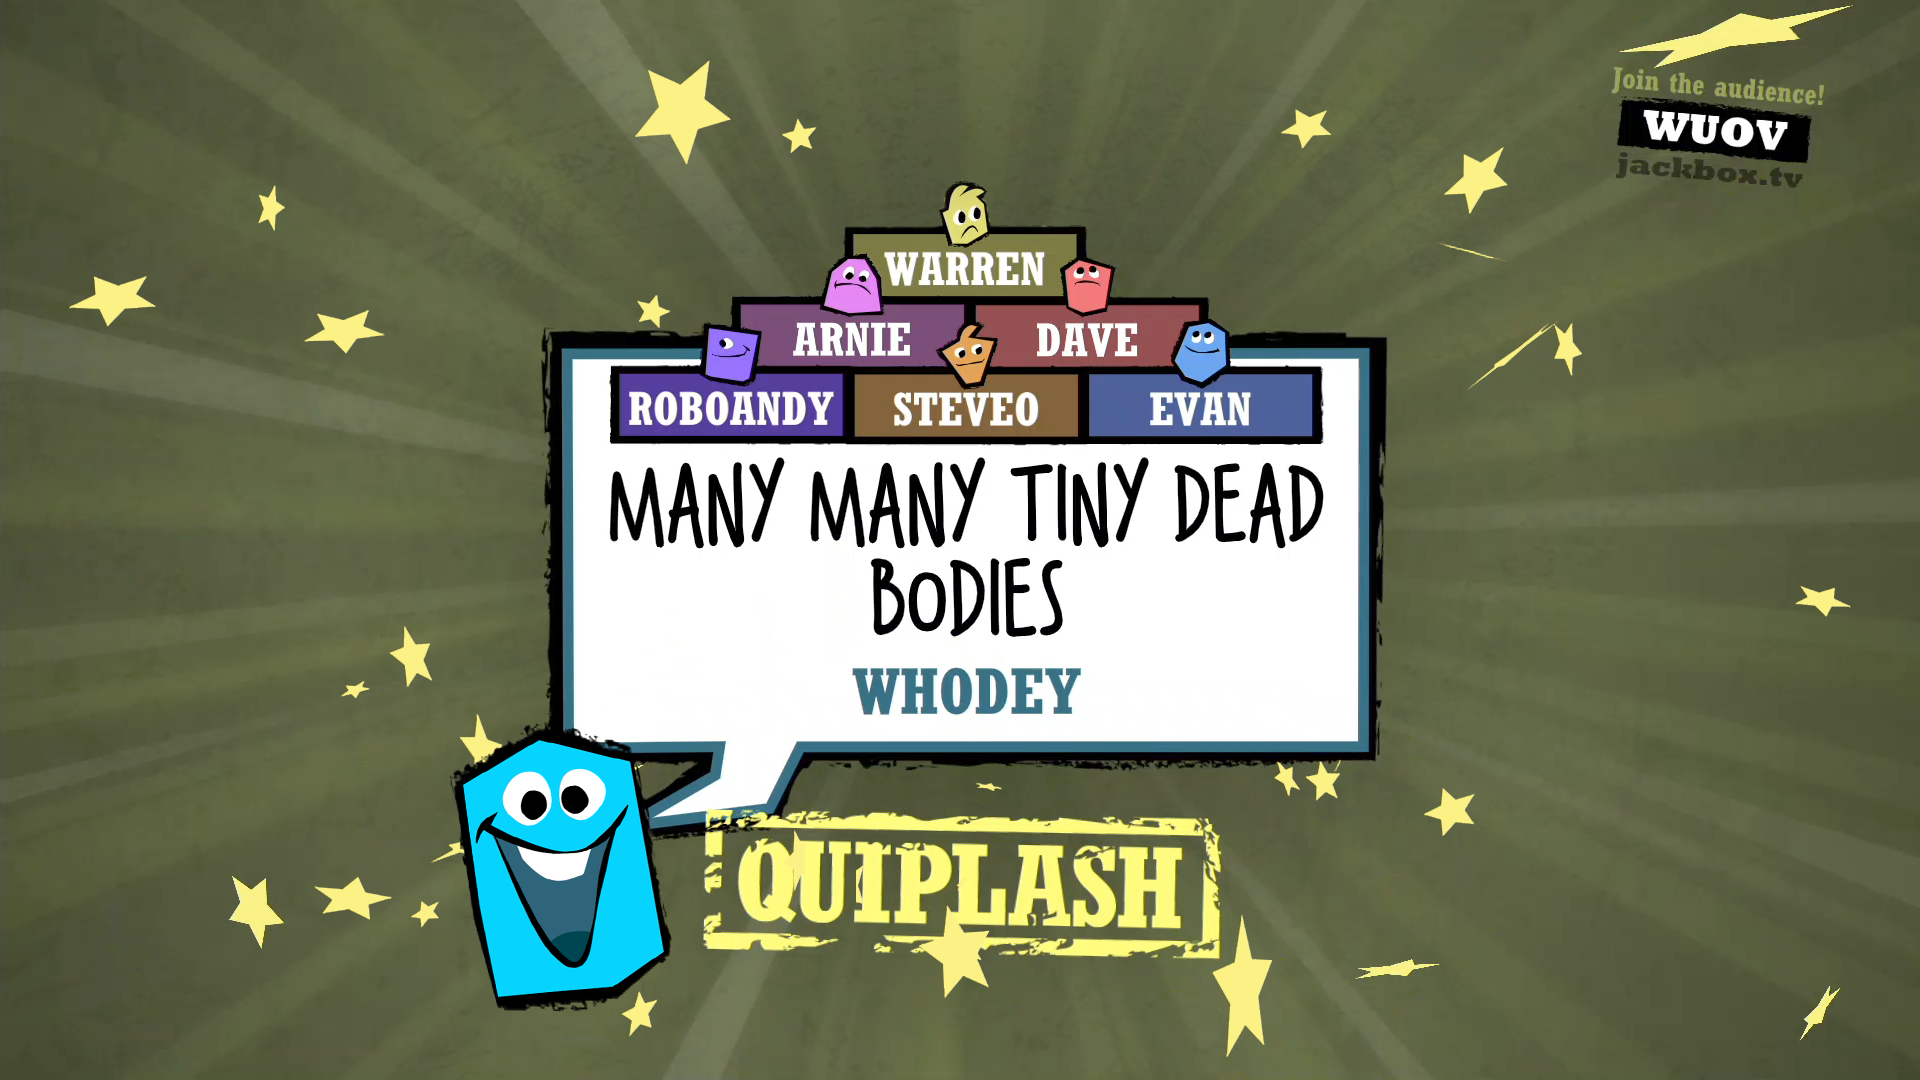 Quiplash is one of fun games to play on Zoom with coworkers that break the ice and get the team to bond quickly